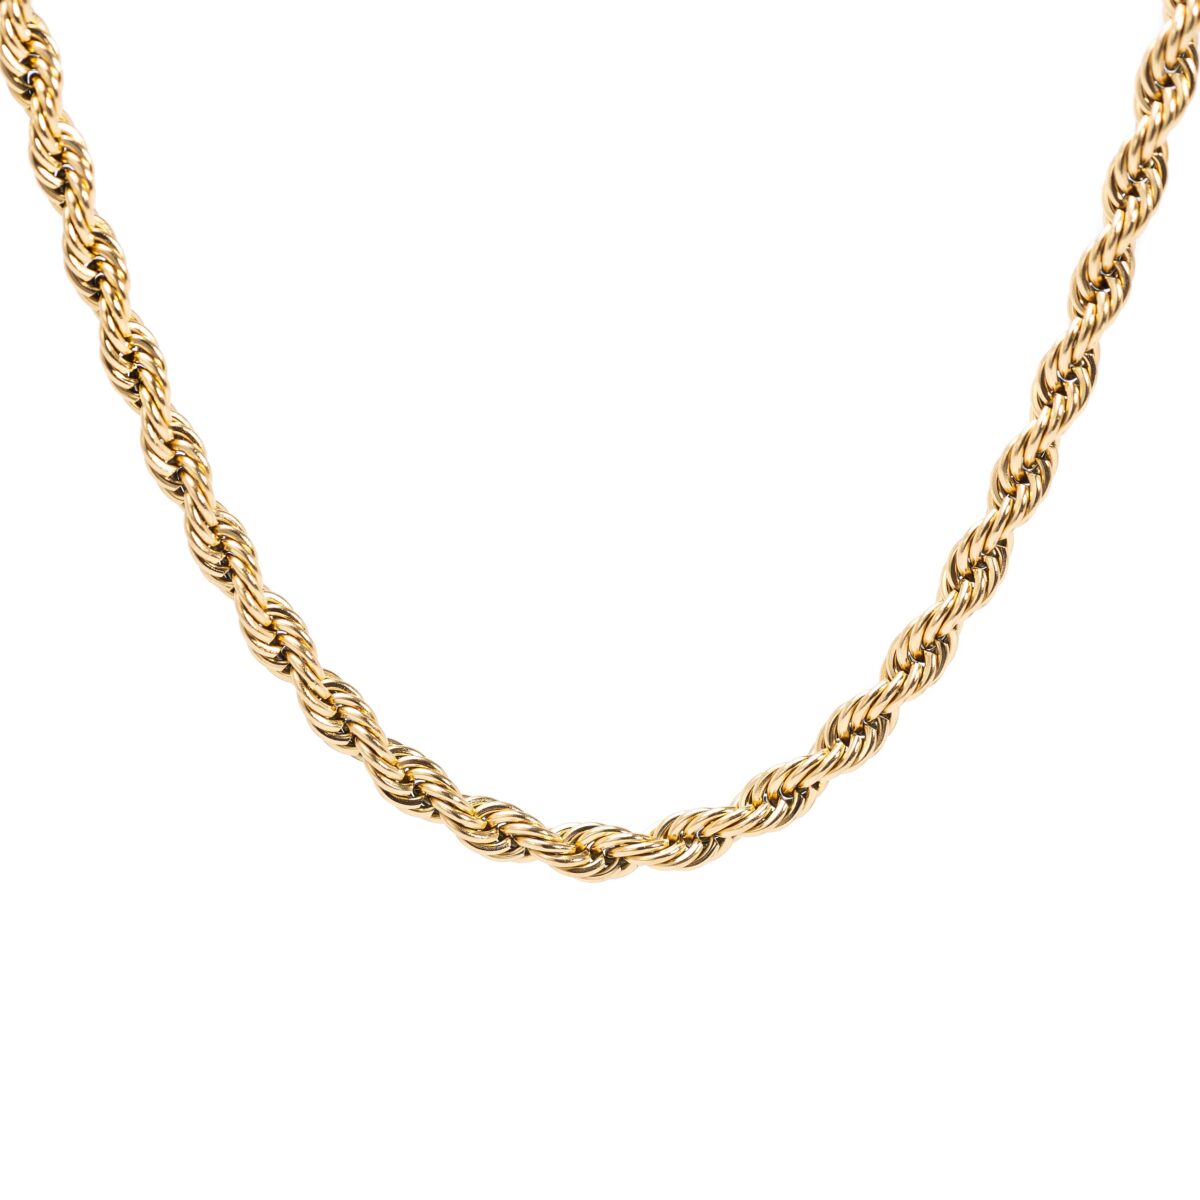 https://m.clubbella.co/product/bold-gold-rope-chain-necklace/ Resized (5 of 134)